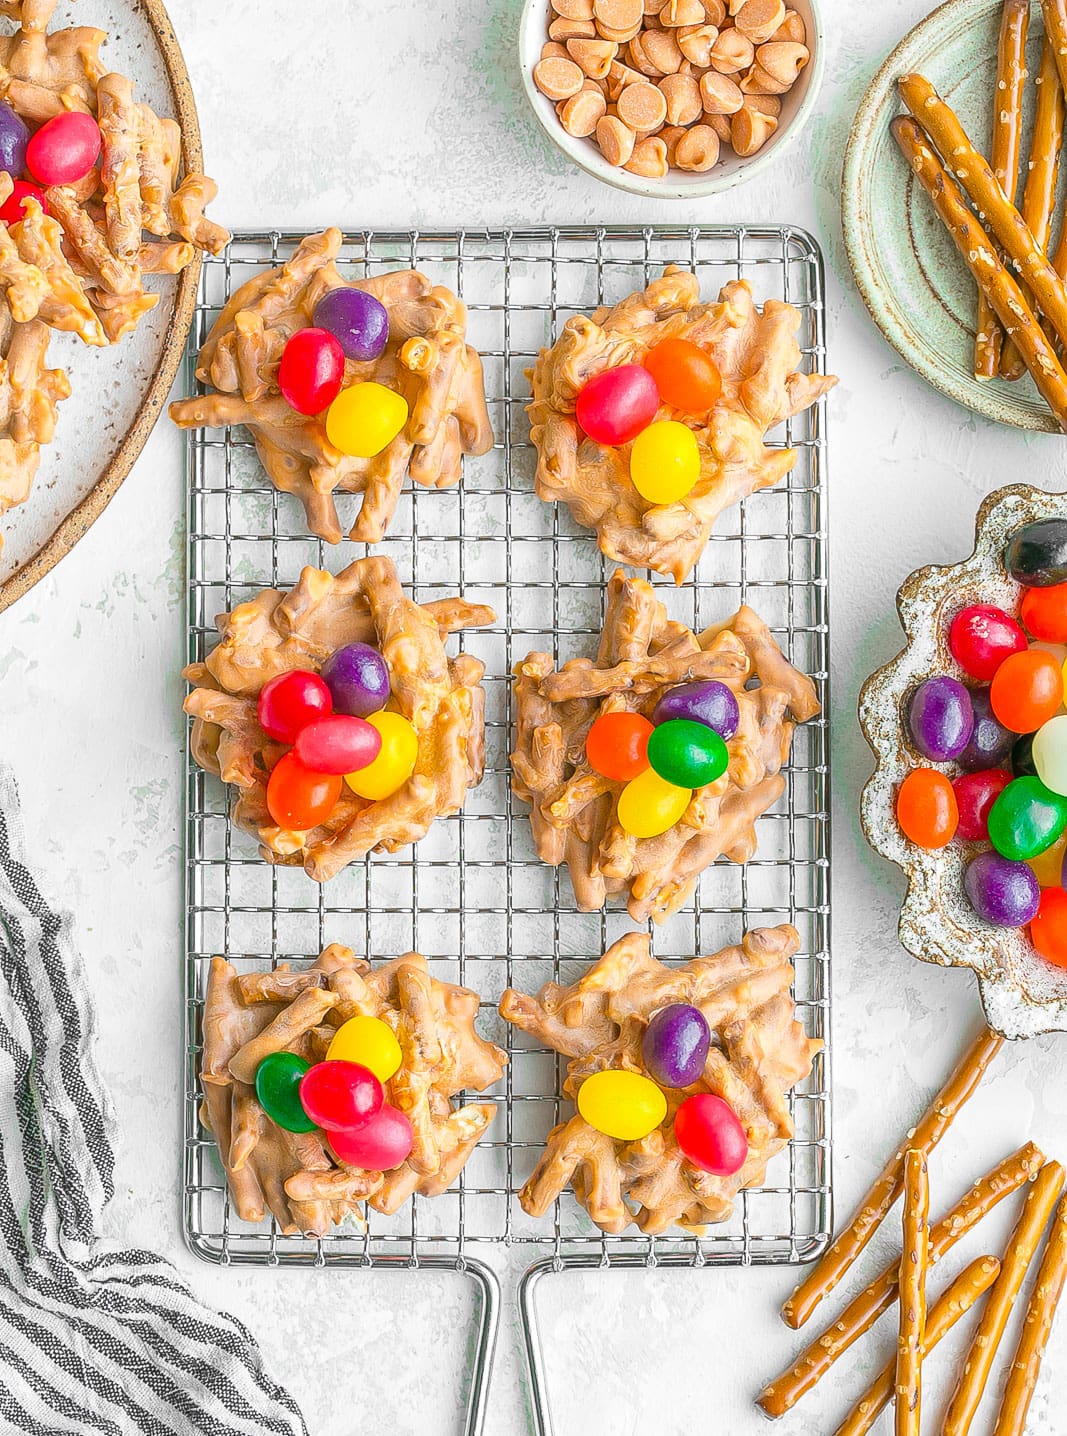 Cookies on cooling rack with jelly beans.